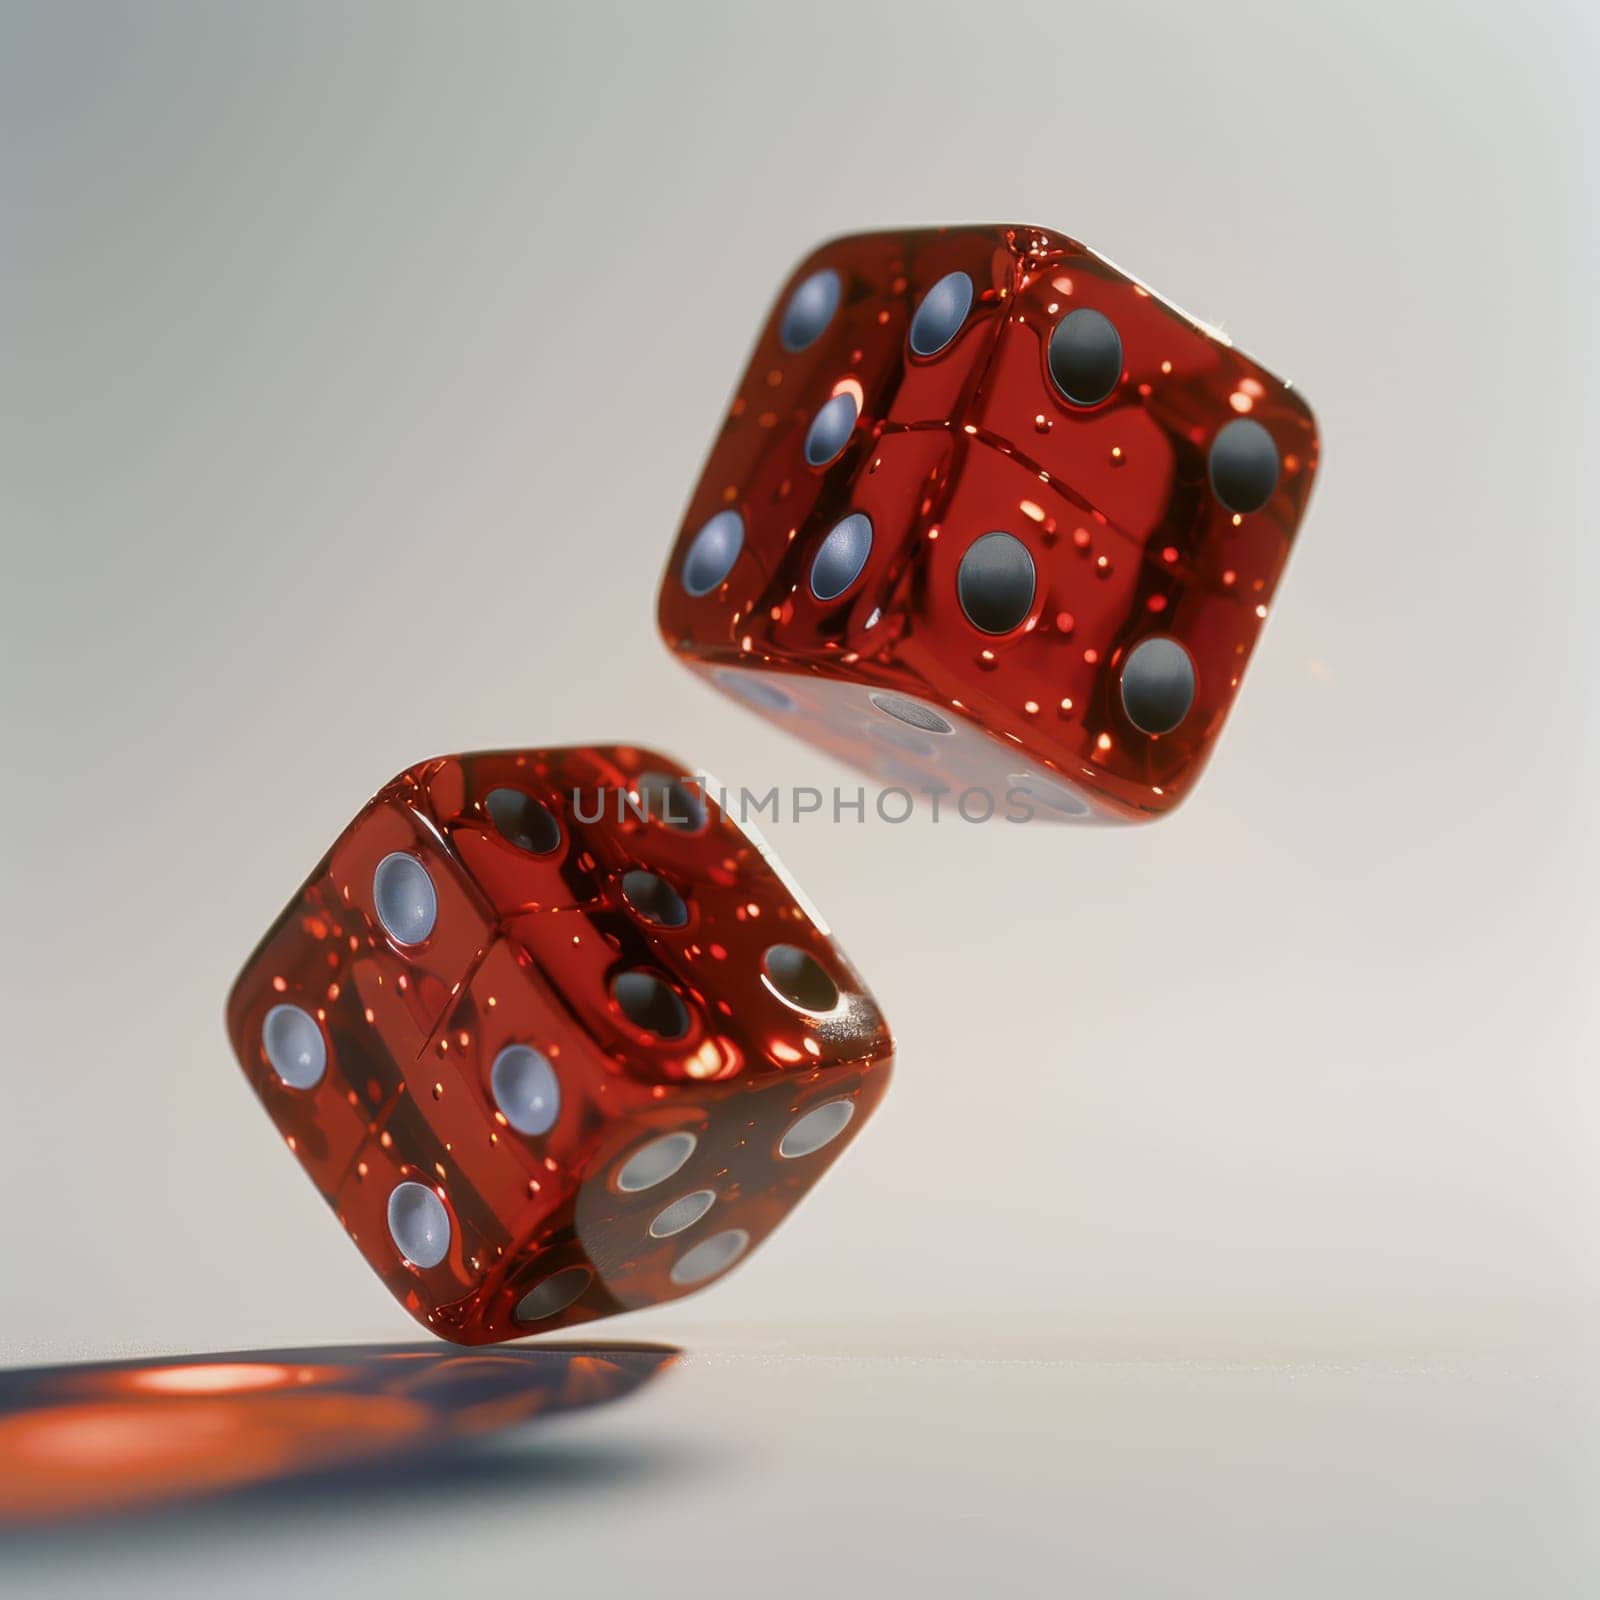 Two red dice are shown in midair, one on top of the other by itchaznong